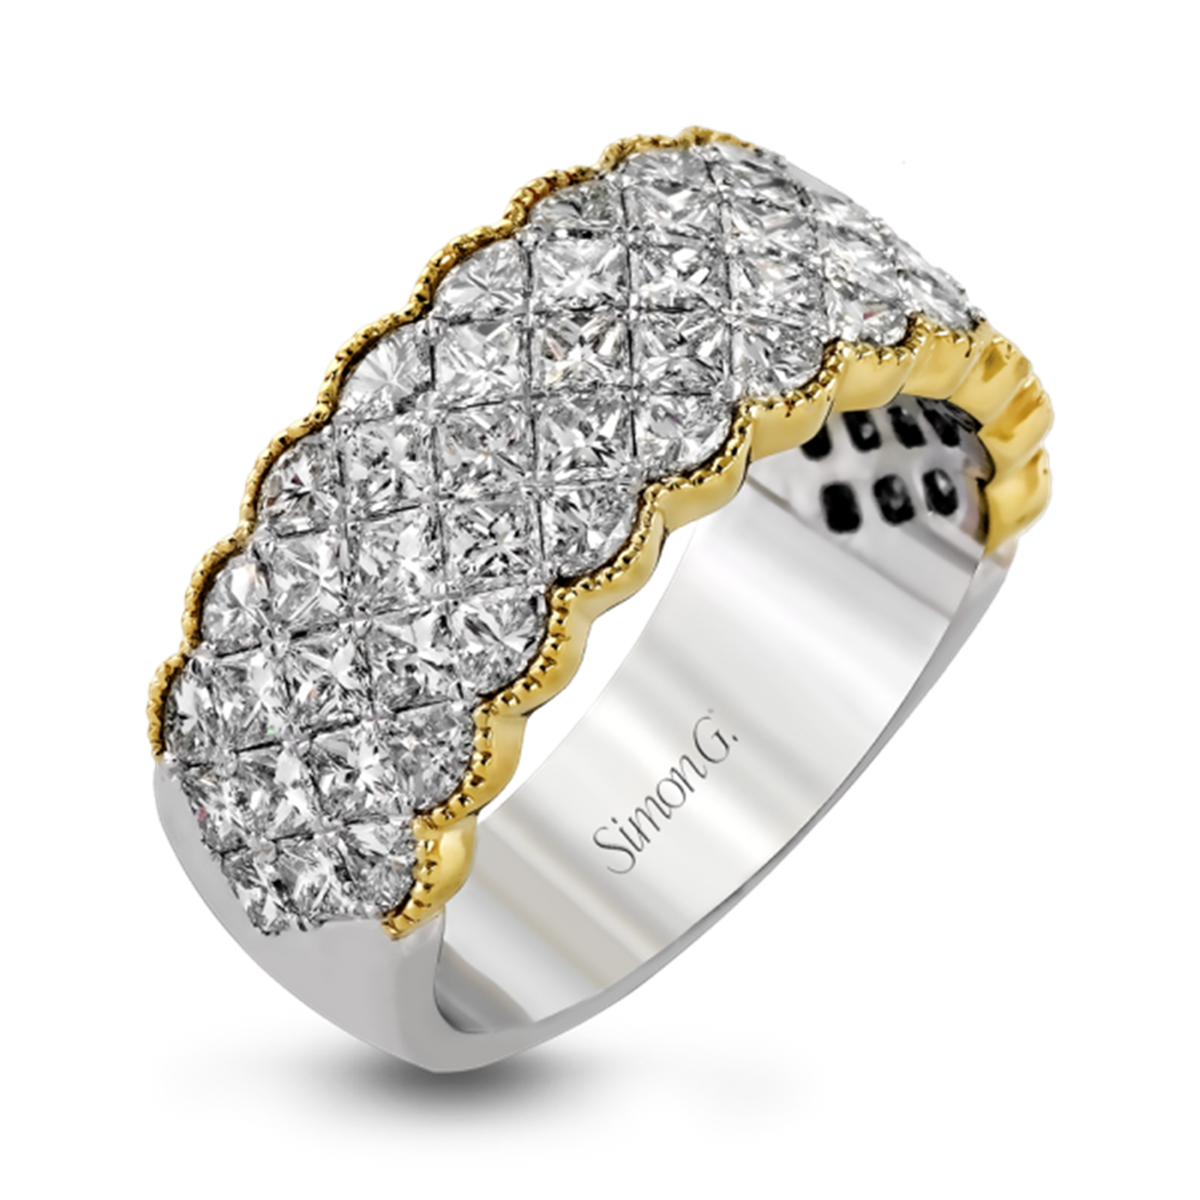 Simong G. 18Kt Yellow & White Gold Vintage Inspired Band With 2.57cttw Natural Diamonds